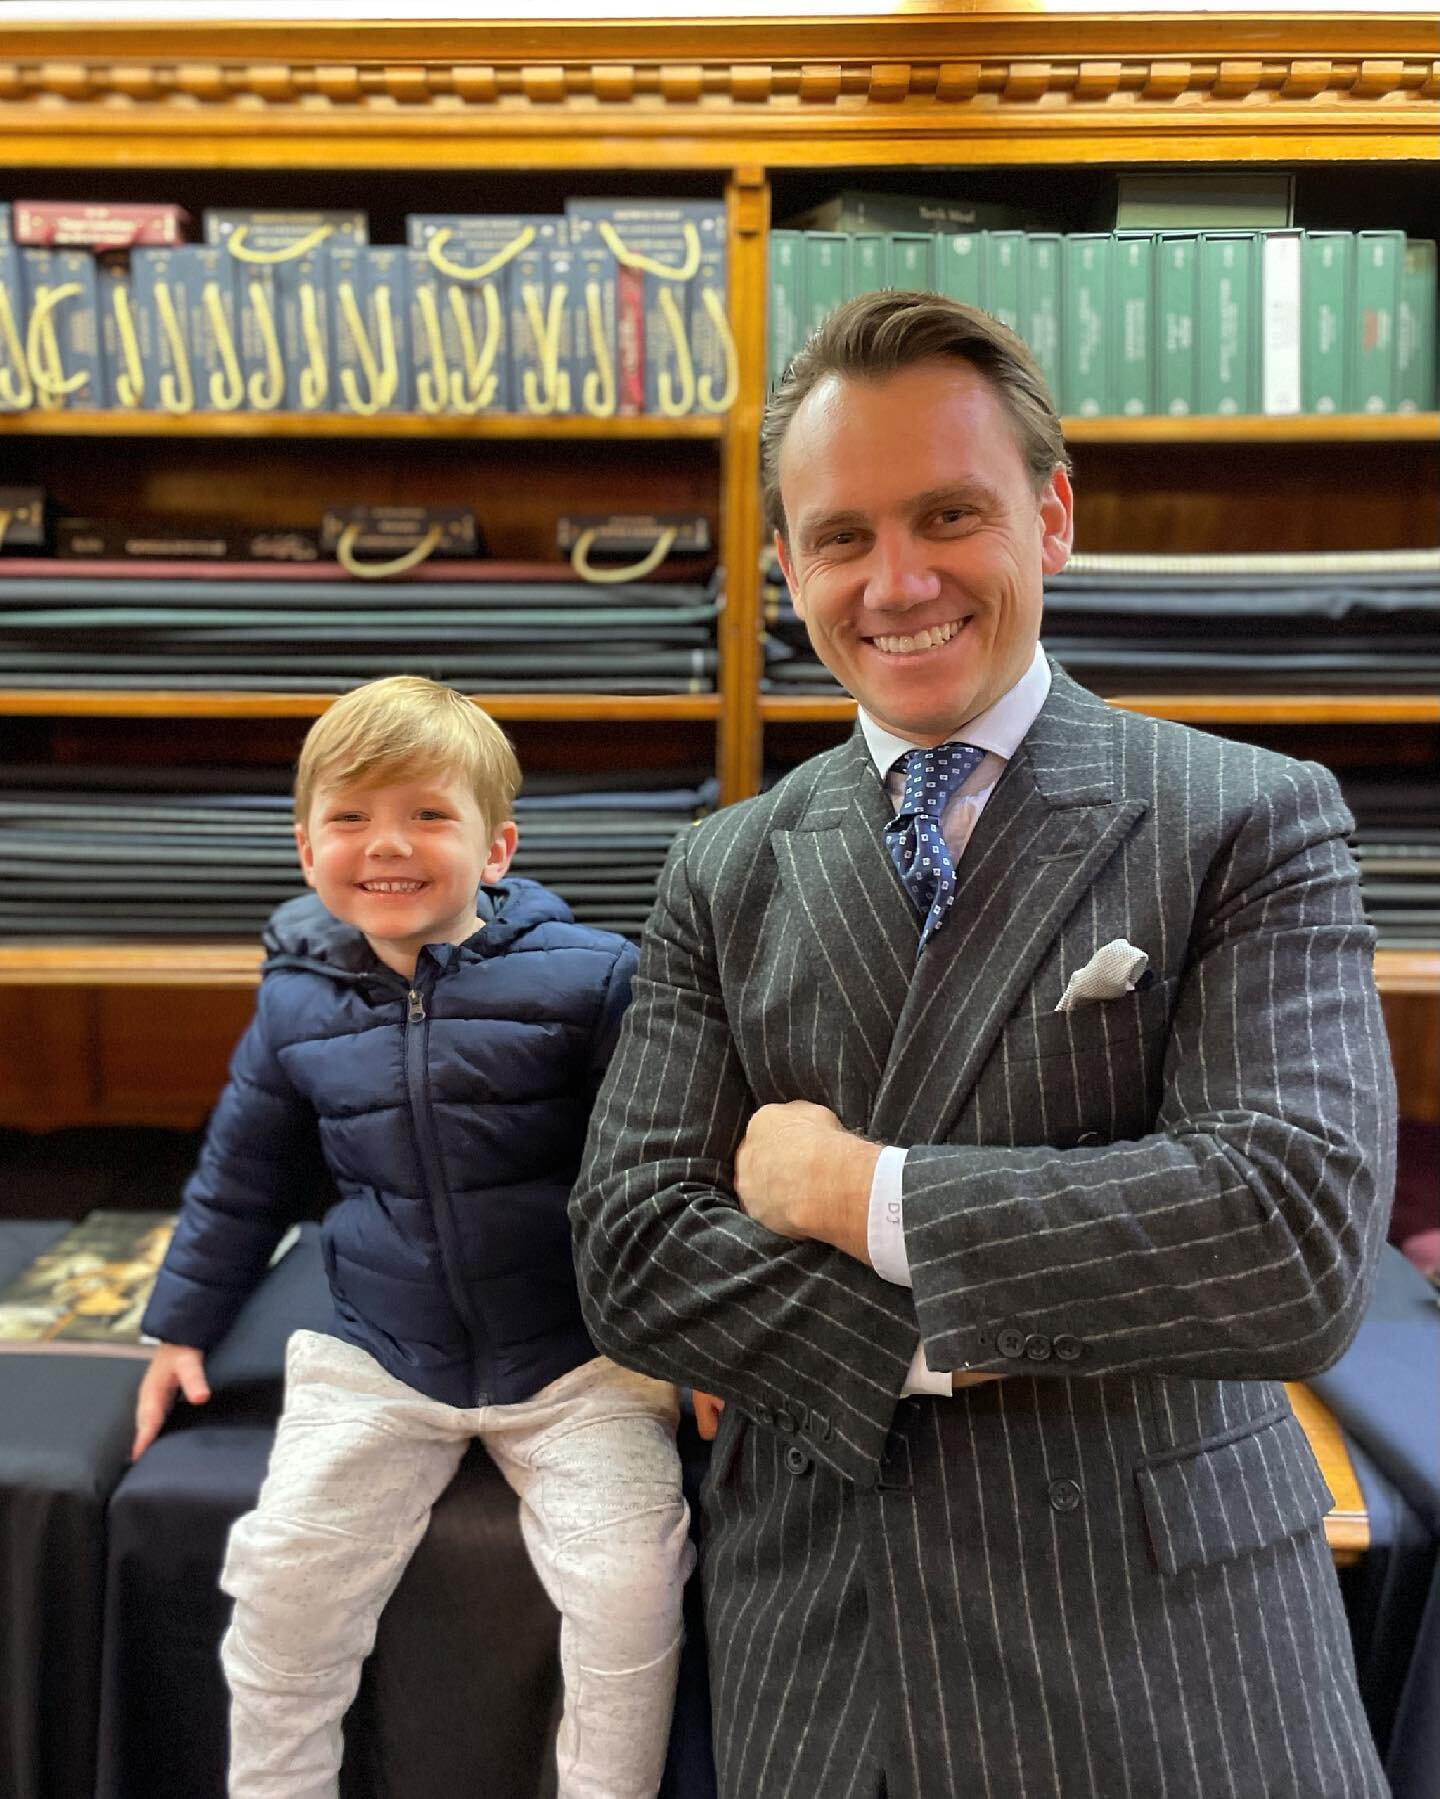 Surprise visit from my son Jackson today. Nothing better 😎 #sonofatailor #futuretailor Staying warm in my double breasted flannel chalk stripe suit. Cloth by @huddersfieldfineworsted #flannelsuit #chalkstripe #flannel